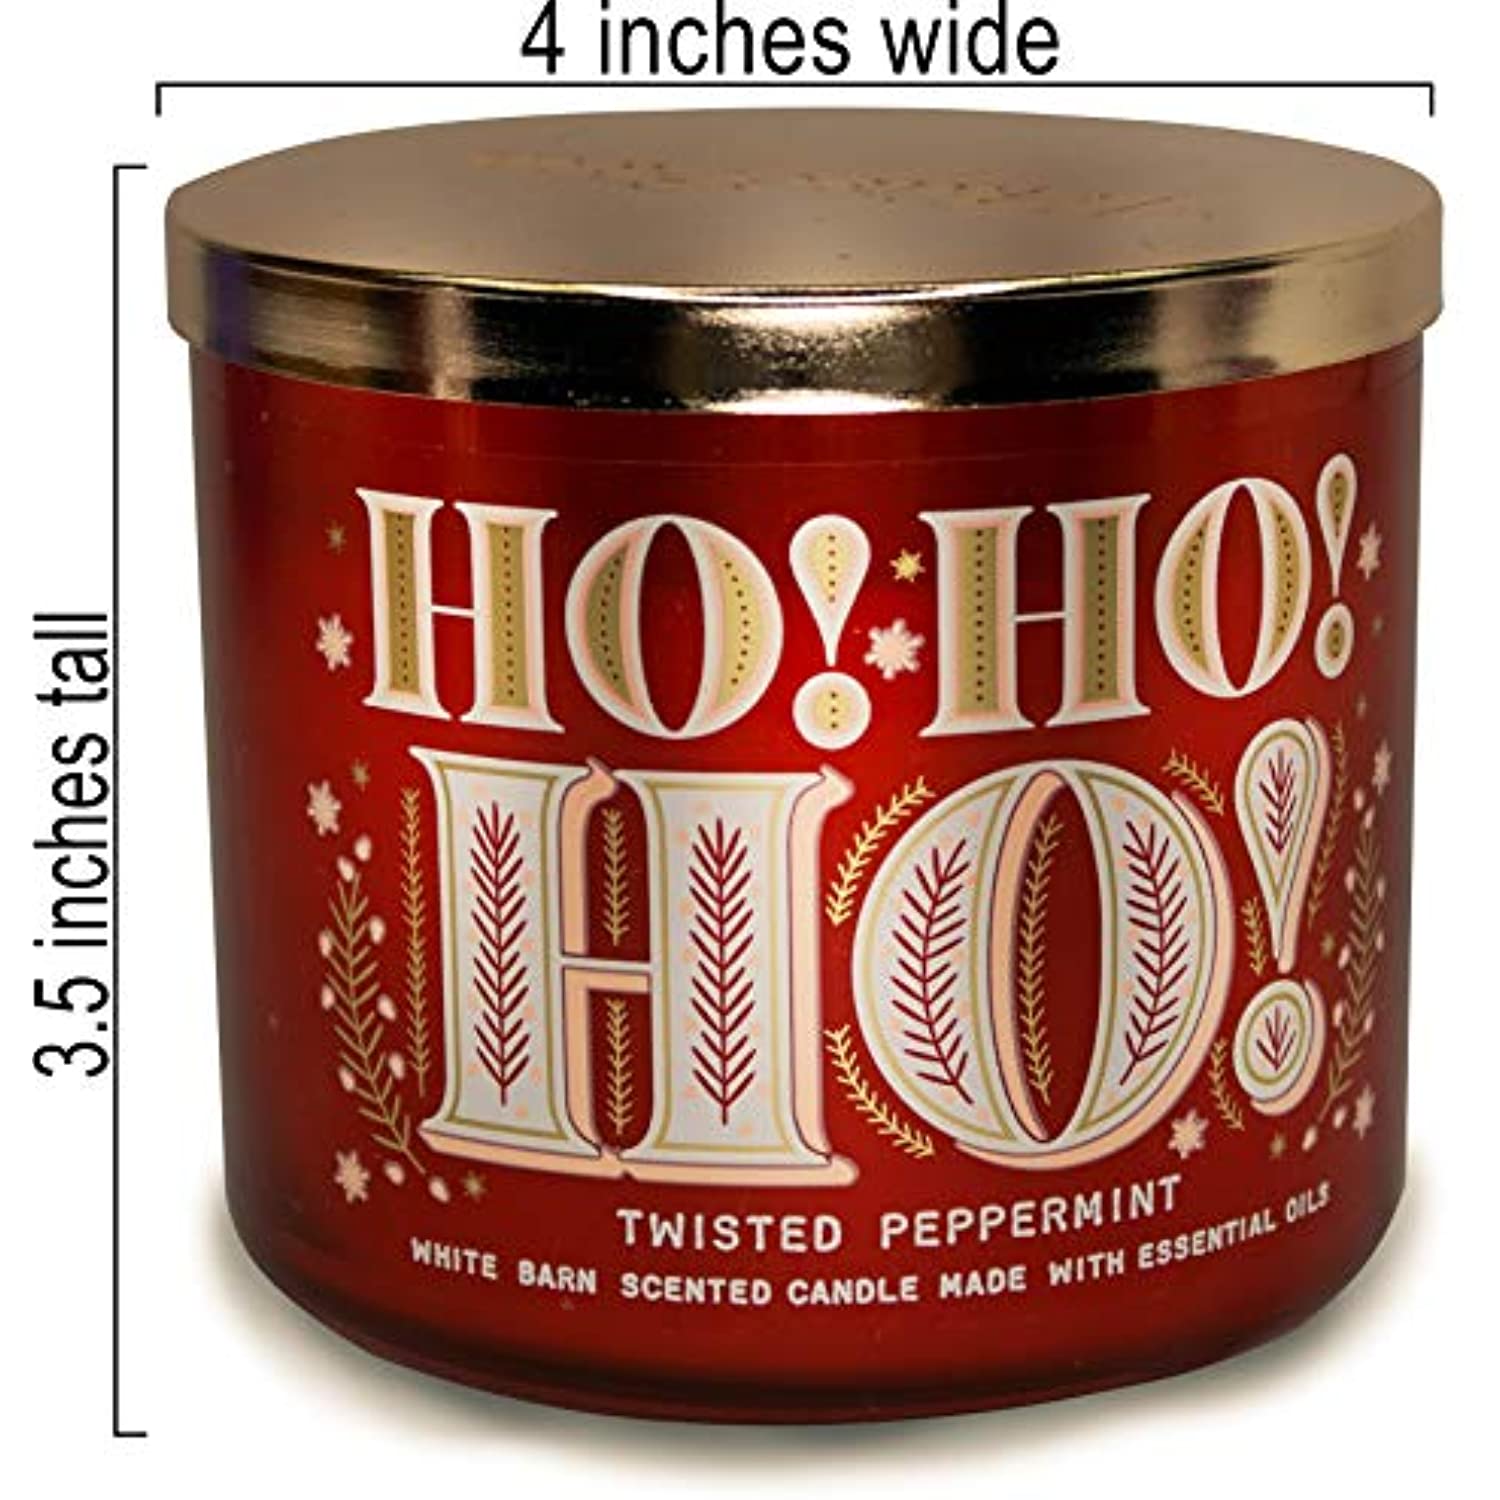 White Barn 3-Wick Candle w/Essential Oils - 14.5 oz - 2020 Holidays Scents! (Twisted Peppermint) - image 4 of 7